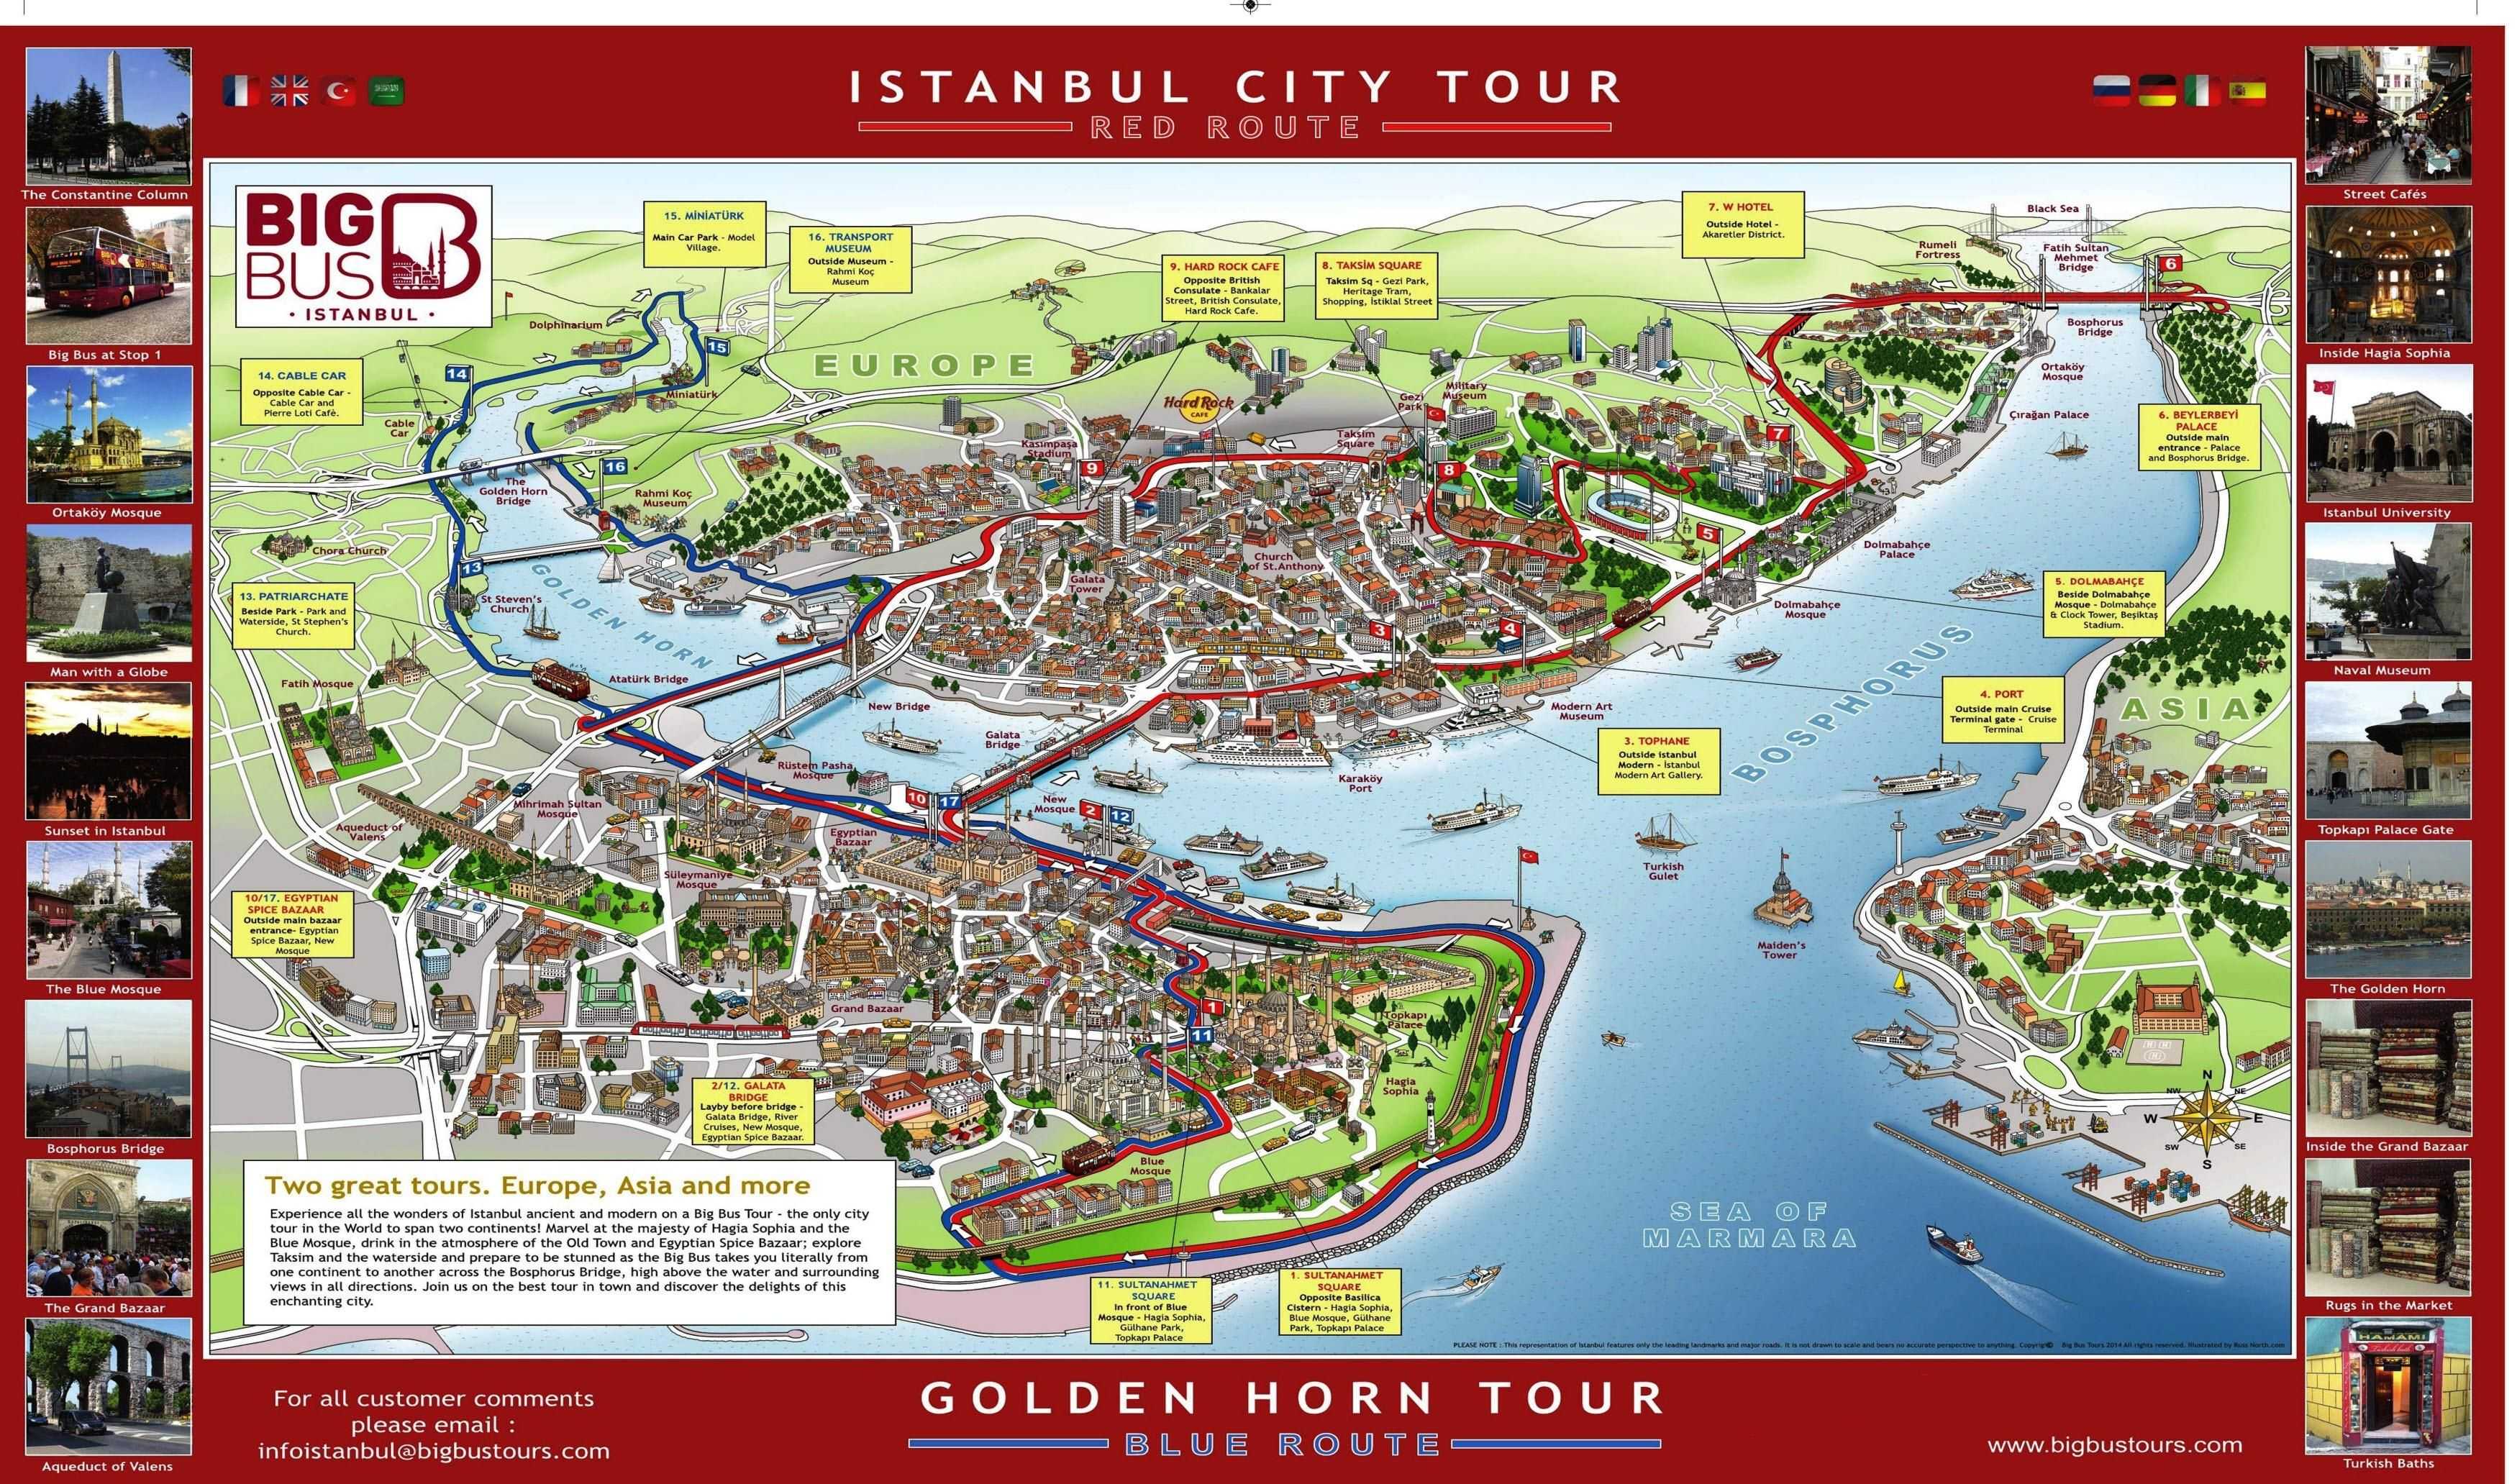 Istanbul museum pass (2022 price with comparison + insider advice)